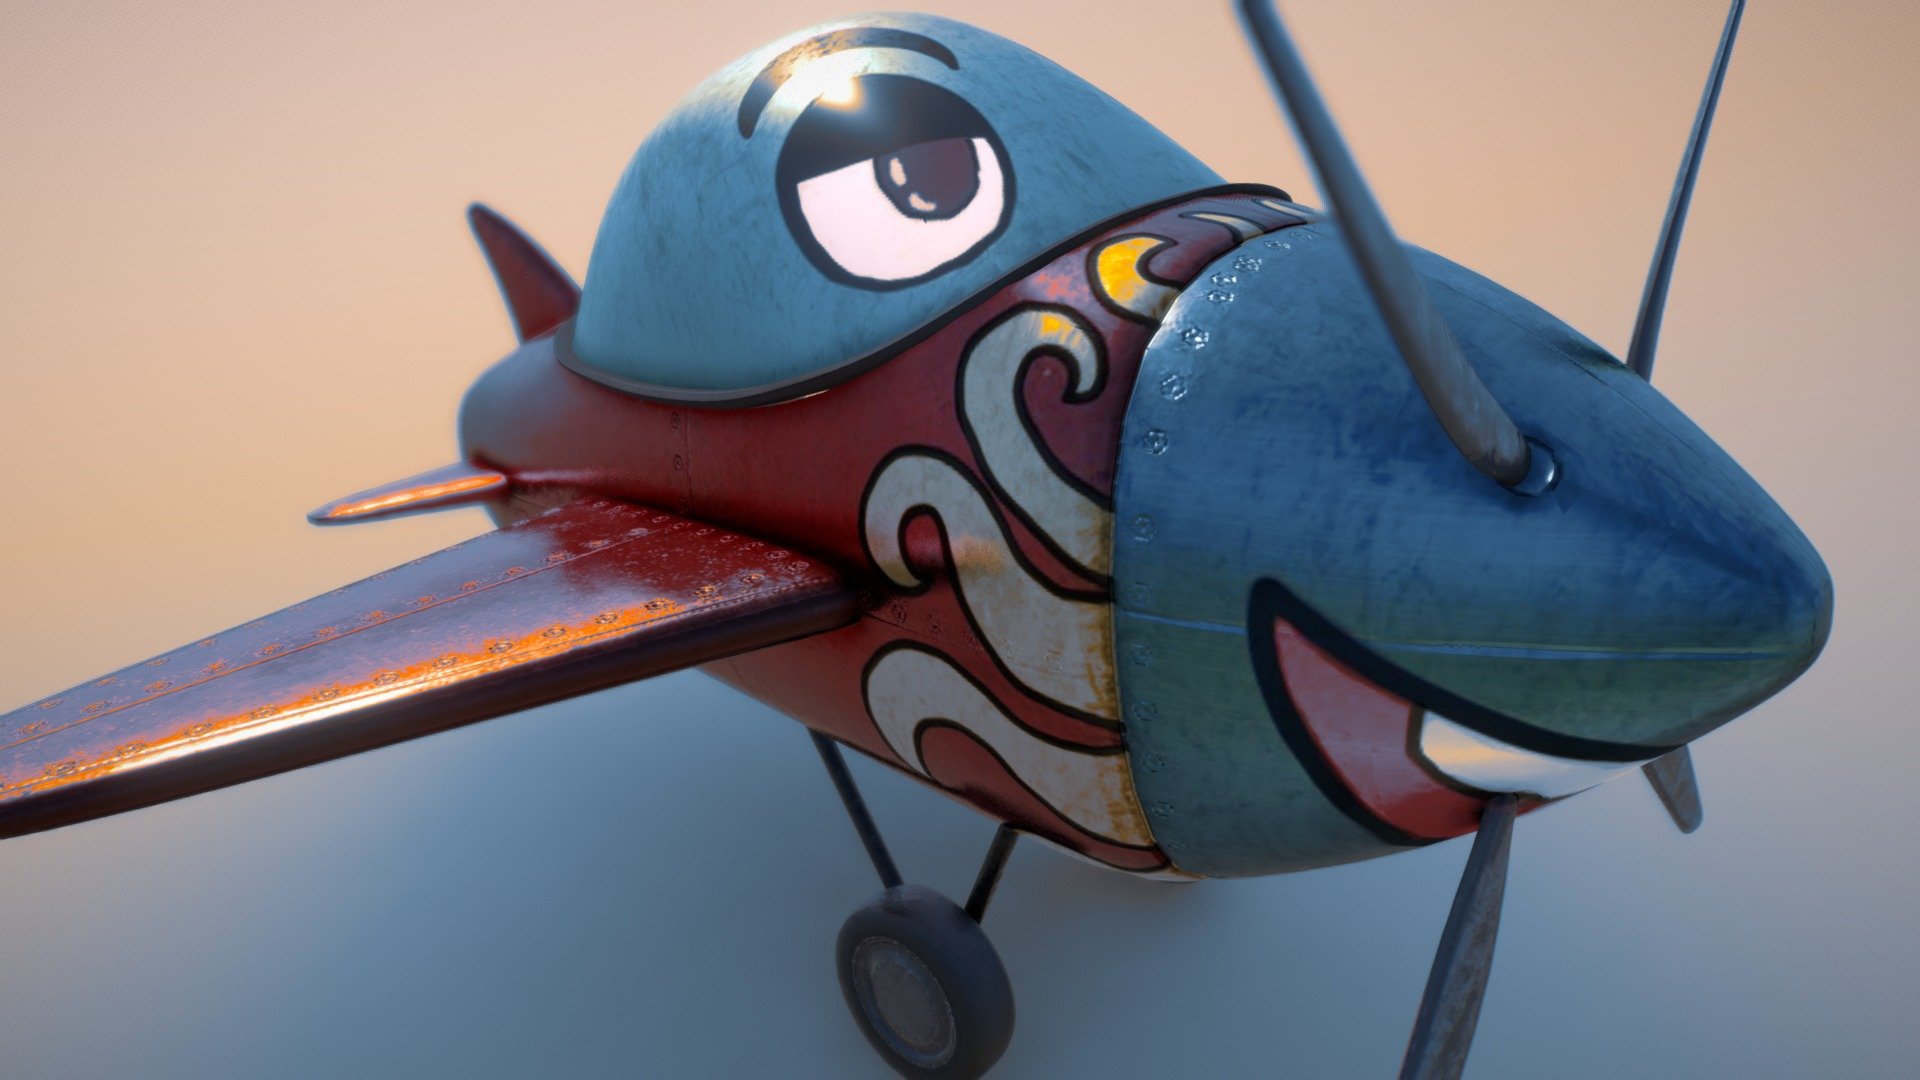 Airplane Cartoon Model
Personal project
Made with Cinema 4D and Substanmce painter

FBX, Cinema File, obj, textures and materials - Airplane Cartoon - 3D model by dsv86 3d model